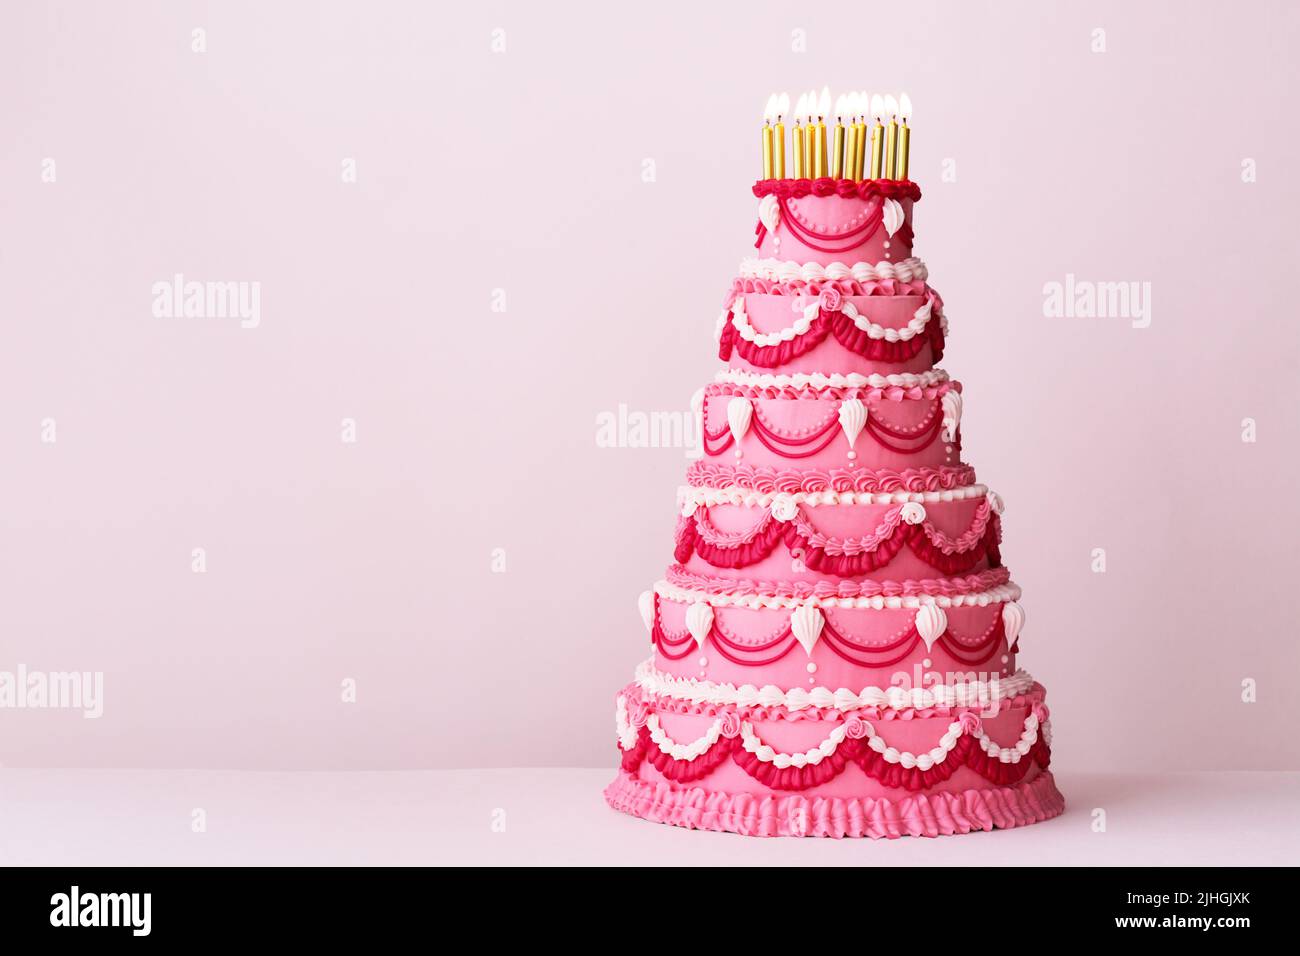 Extravagant pink tiered birthday cake decorated with vintage buttercream piped frills and gold birthday candles Stock Photo